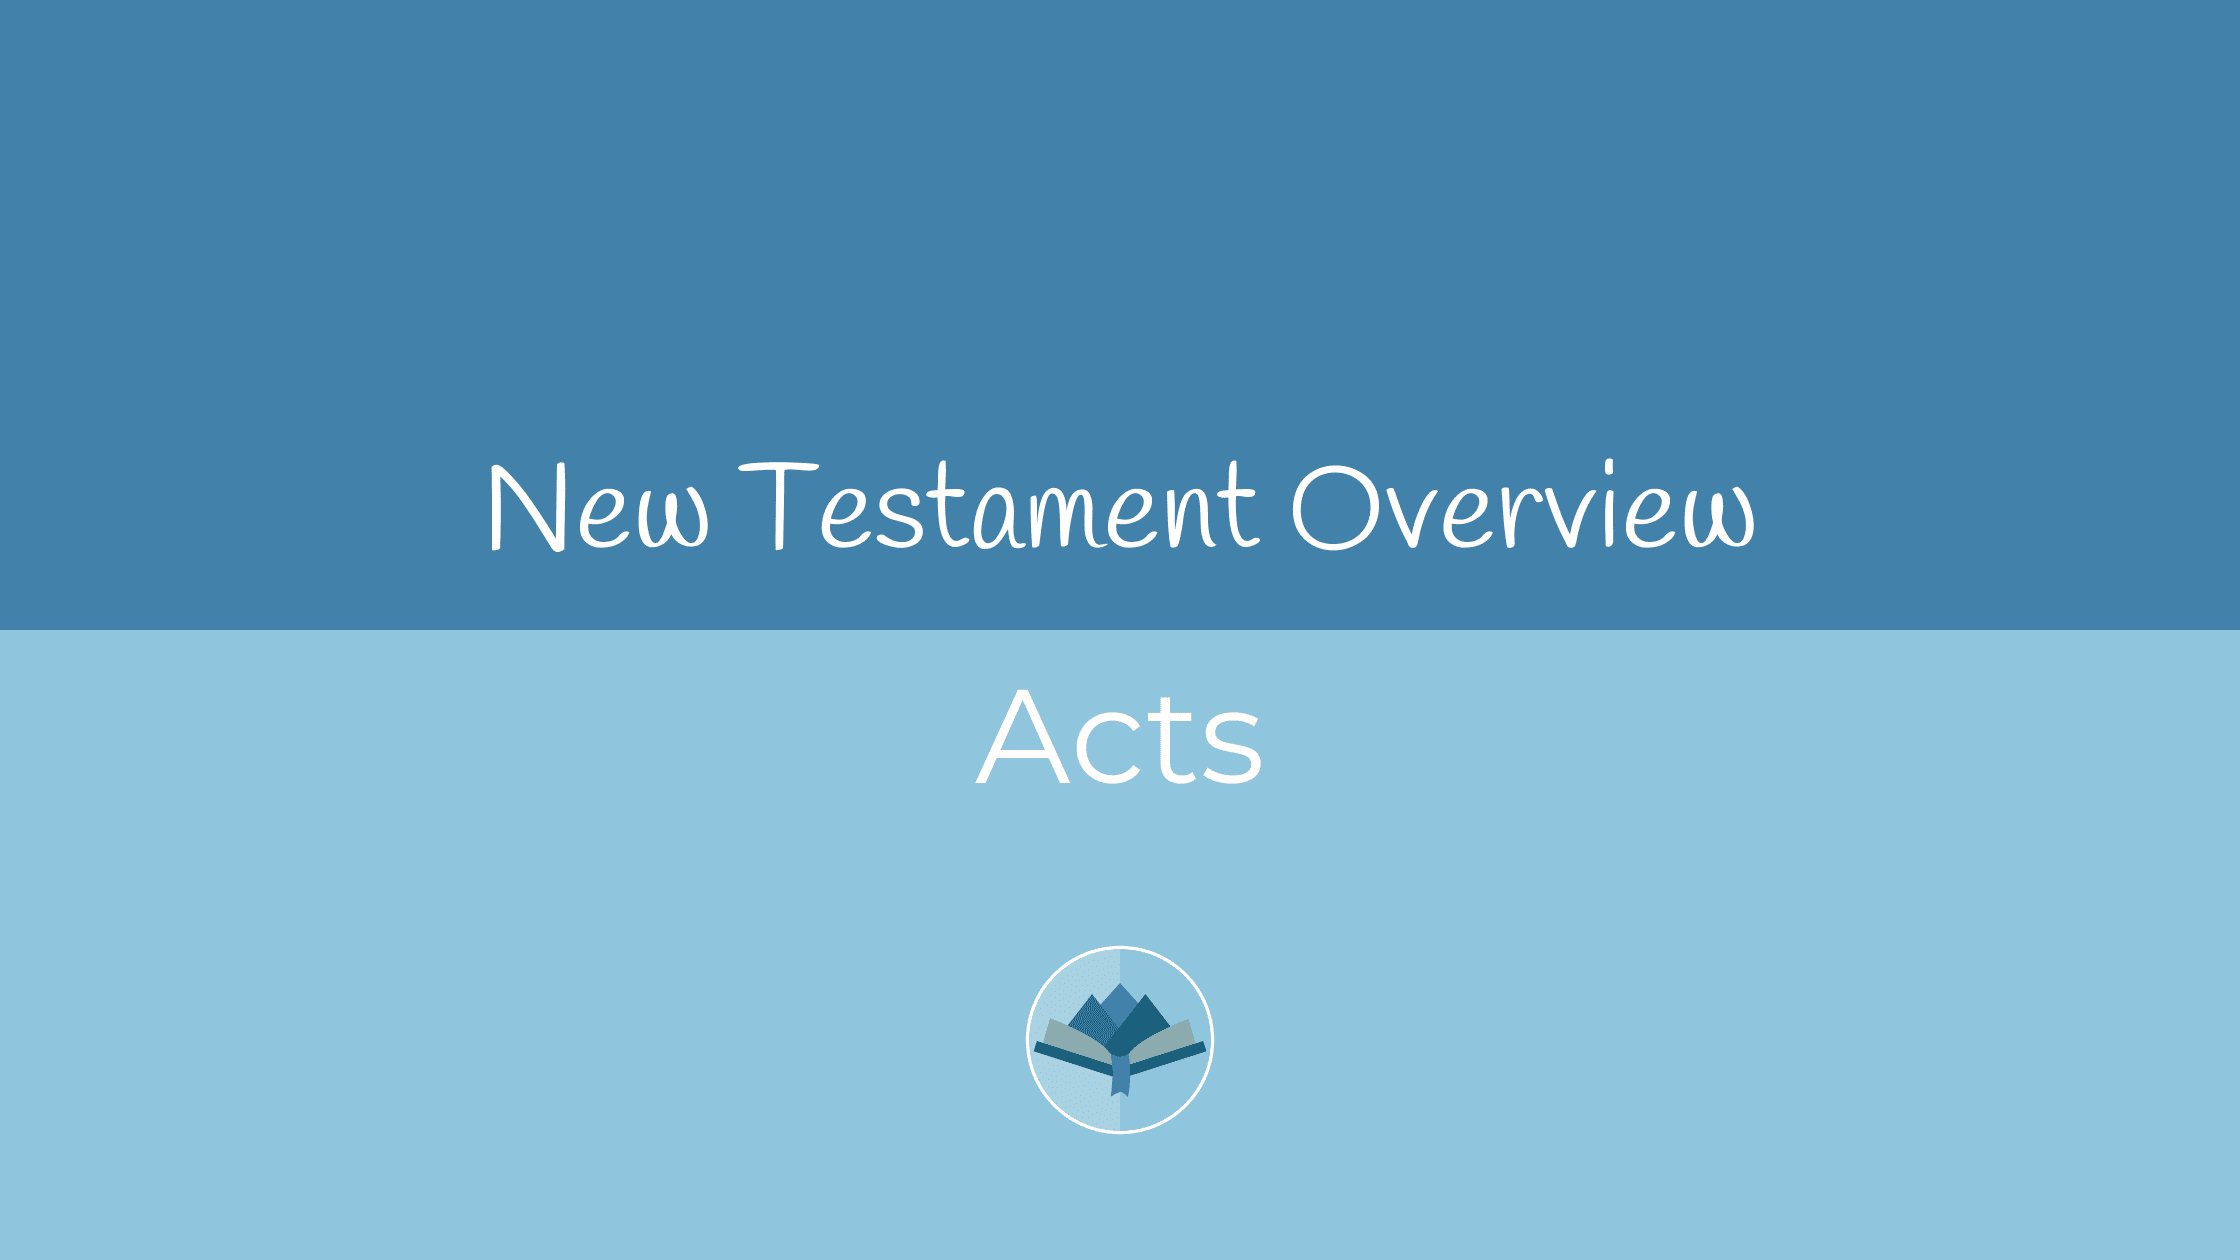 Acts Overview